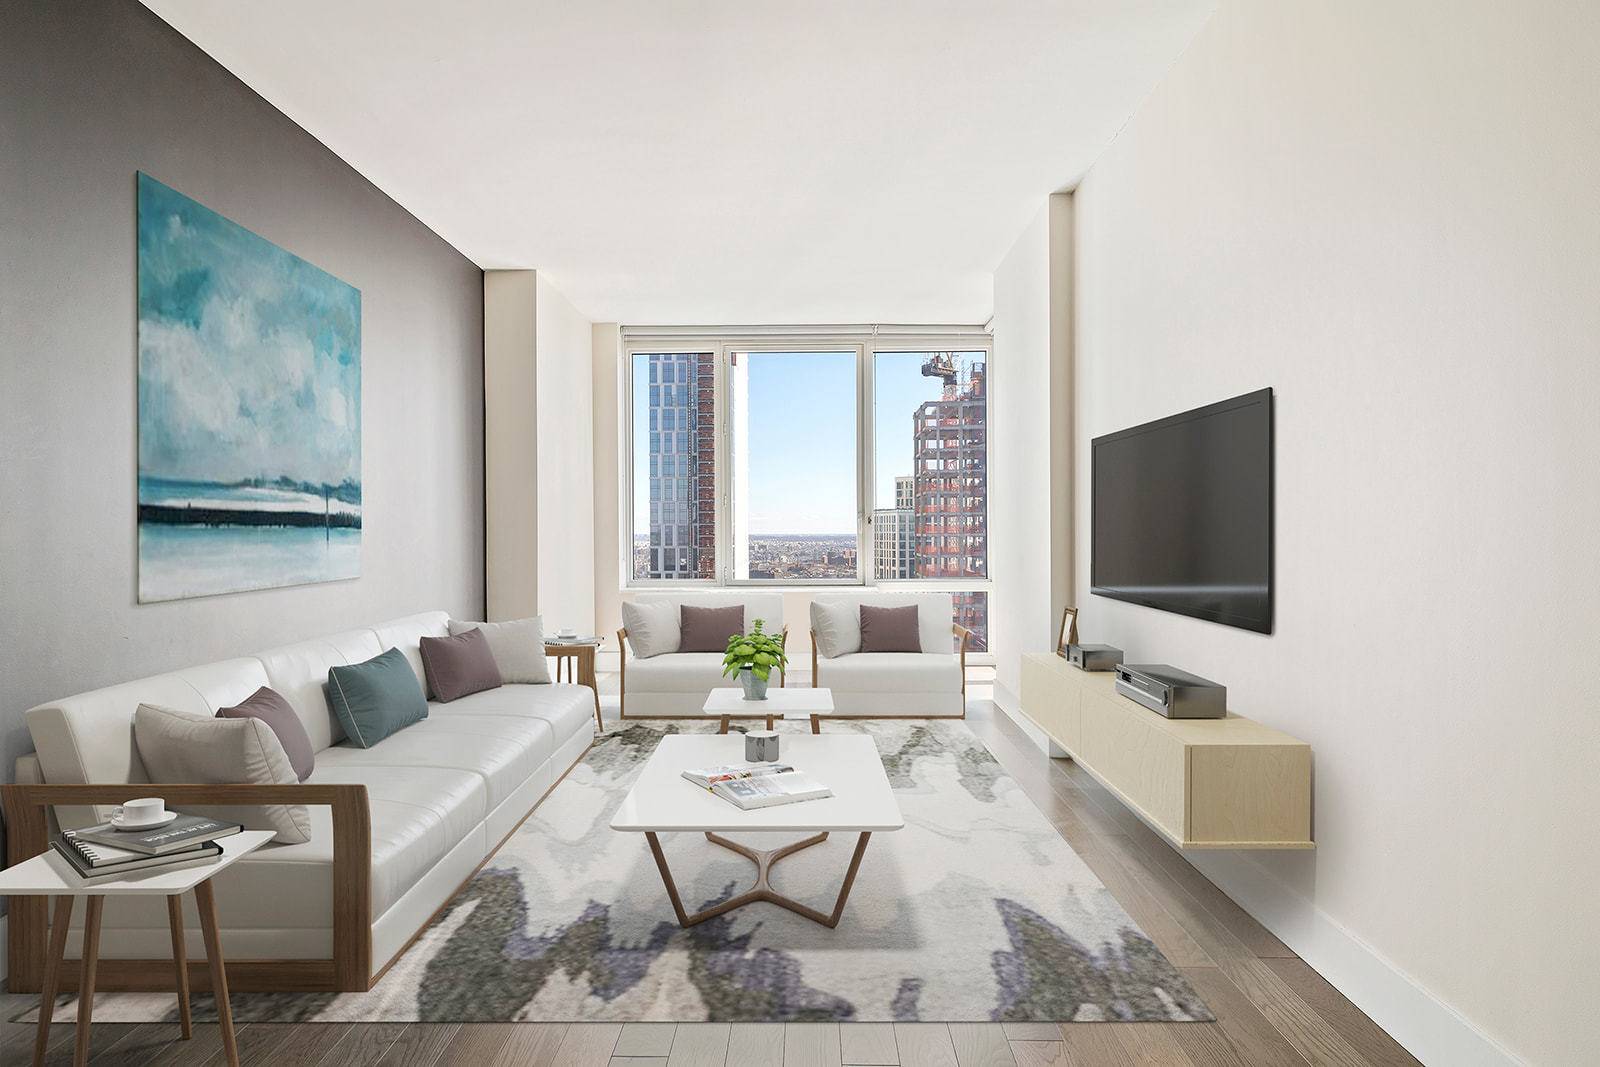 CONTACT EXCLUSIVE AGENT FOR VIDEO FOOTAGE VIRTUAL TOUR Welcome to the exceptional 41E, this high floor 1.